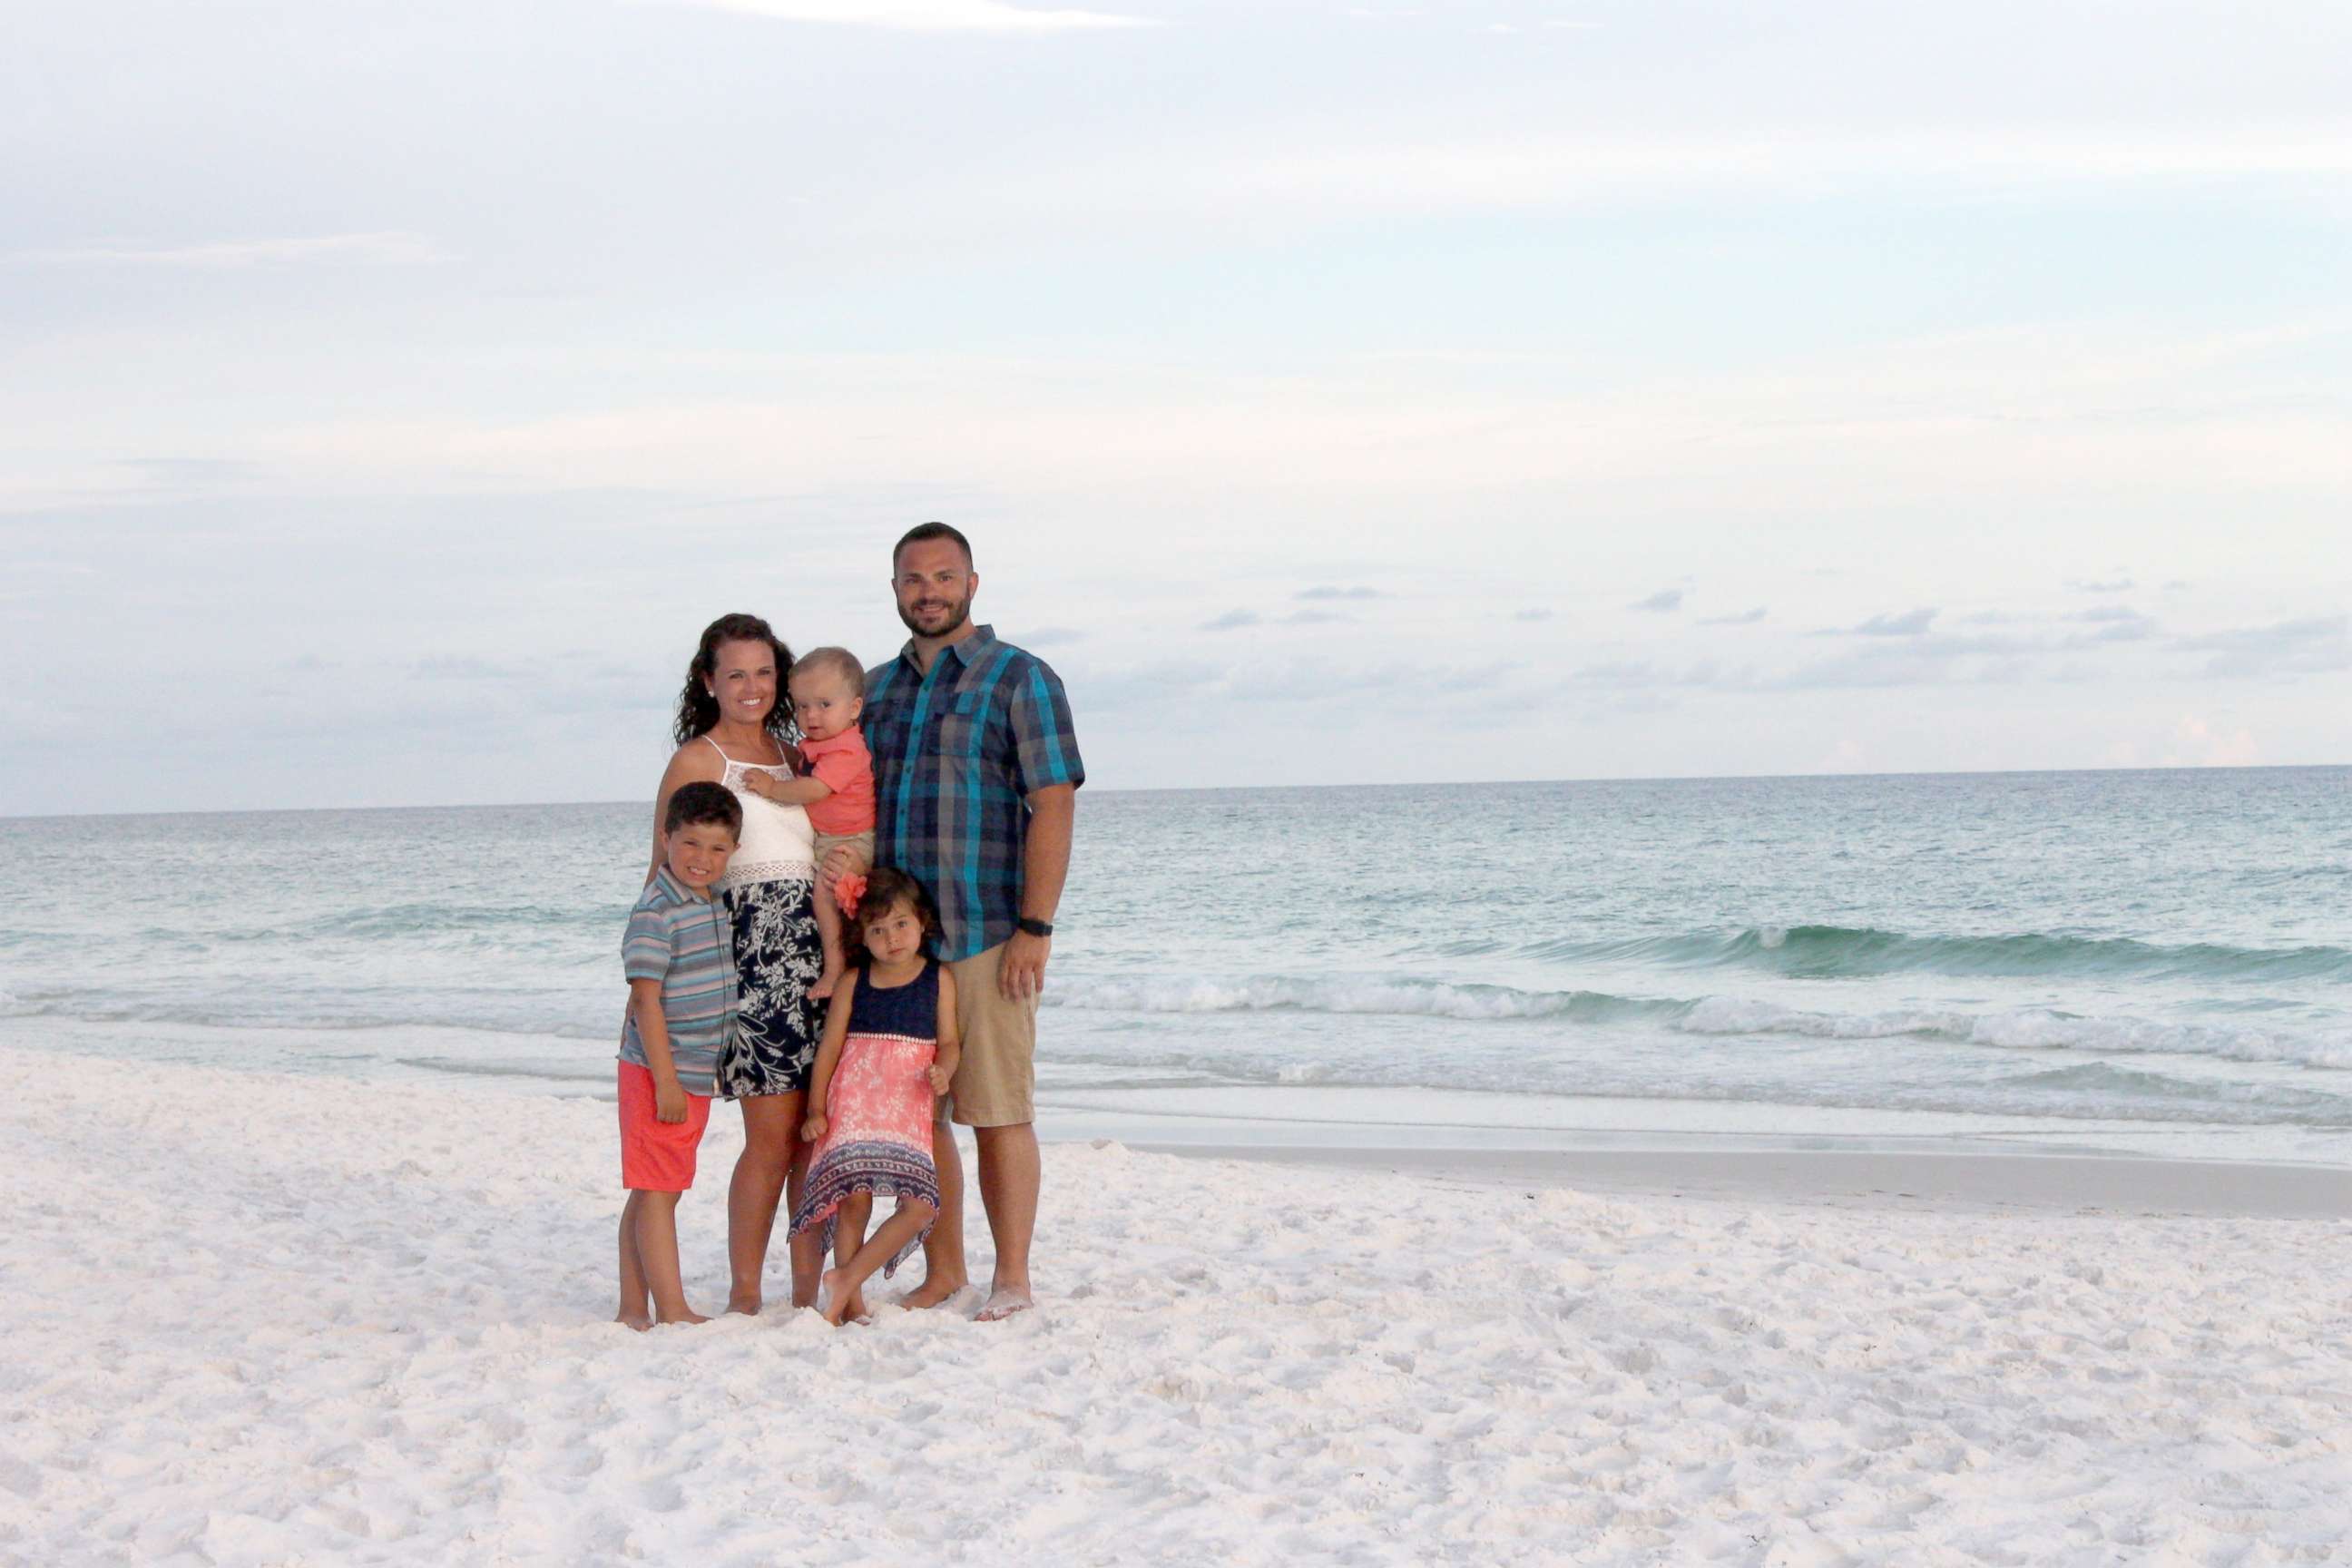 PHOTO: Adam and Whitney Dinkel of Overland Park, Kansas, seen in a photo while vacationing in Florida with their children, Layton, 6, Gracelyn, 4 and Roman, 2.